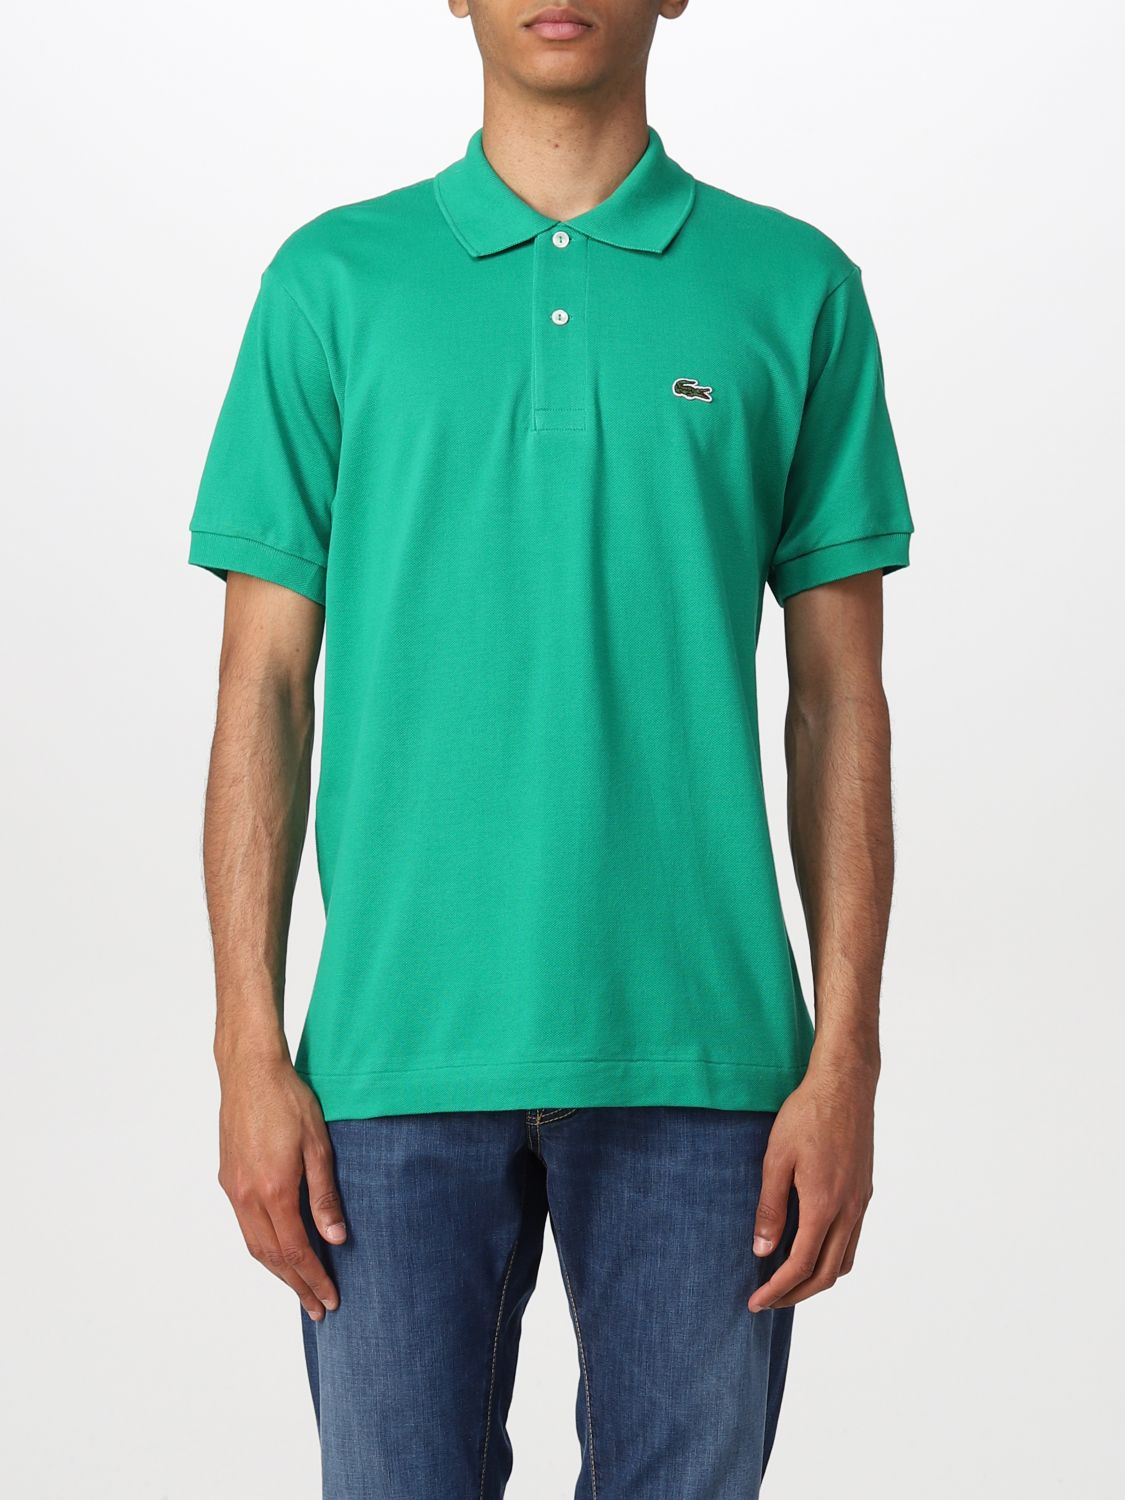 Renaissance Likeur vloeiend LACOSTE: basic polo shirt with logo - Bottle Green | Lacoste polo shirt  L1212 online on GIGLIO.COM